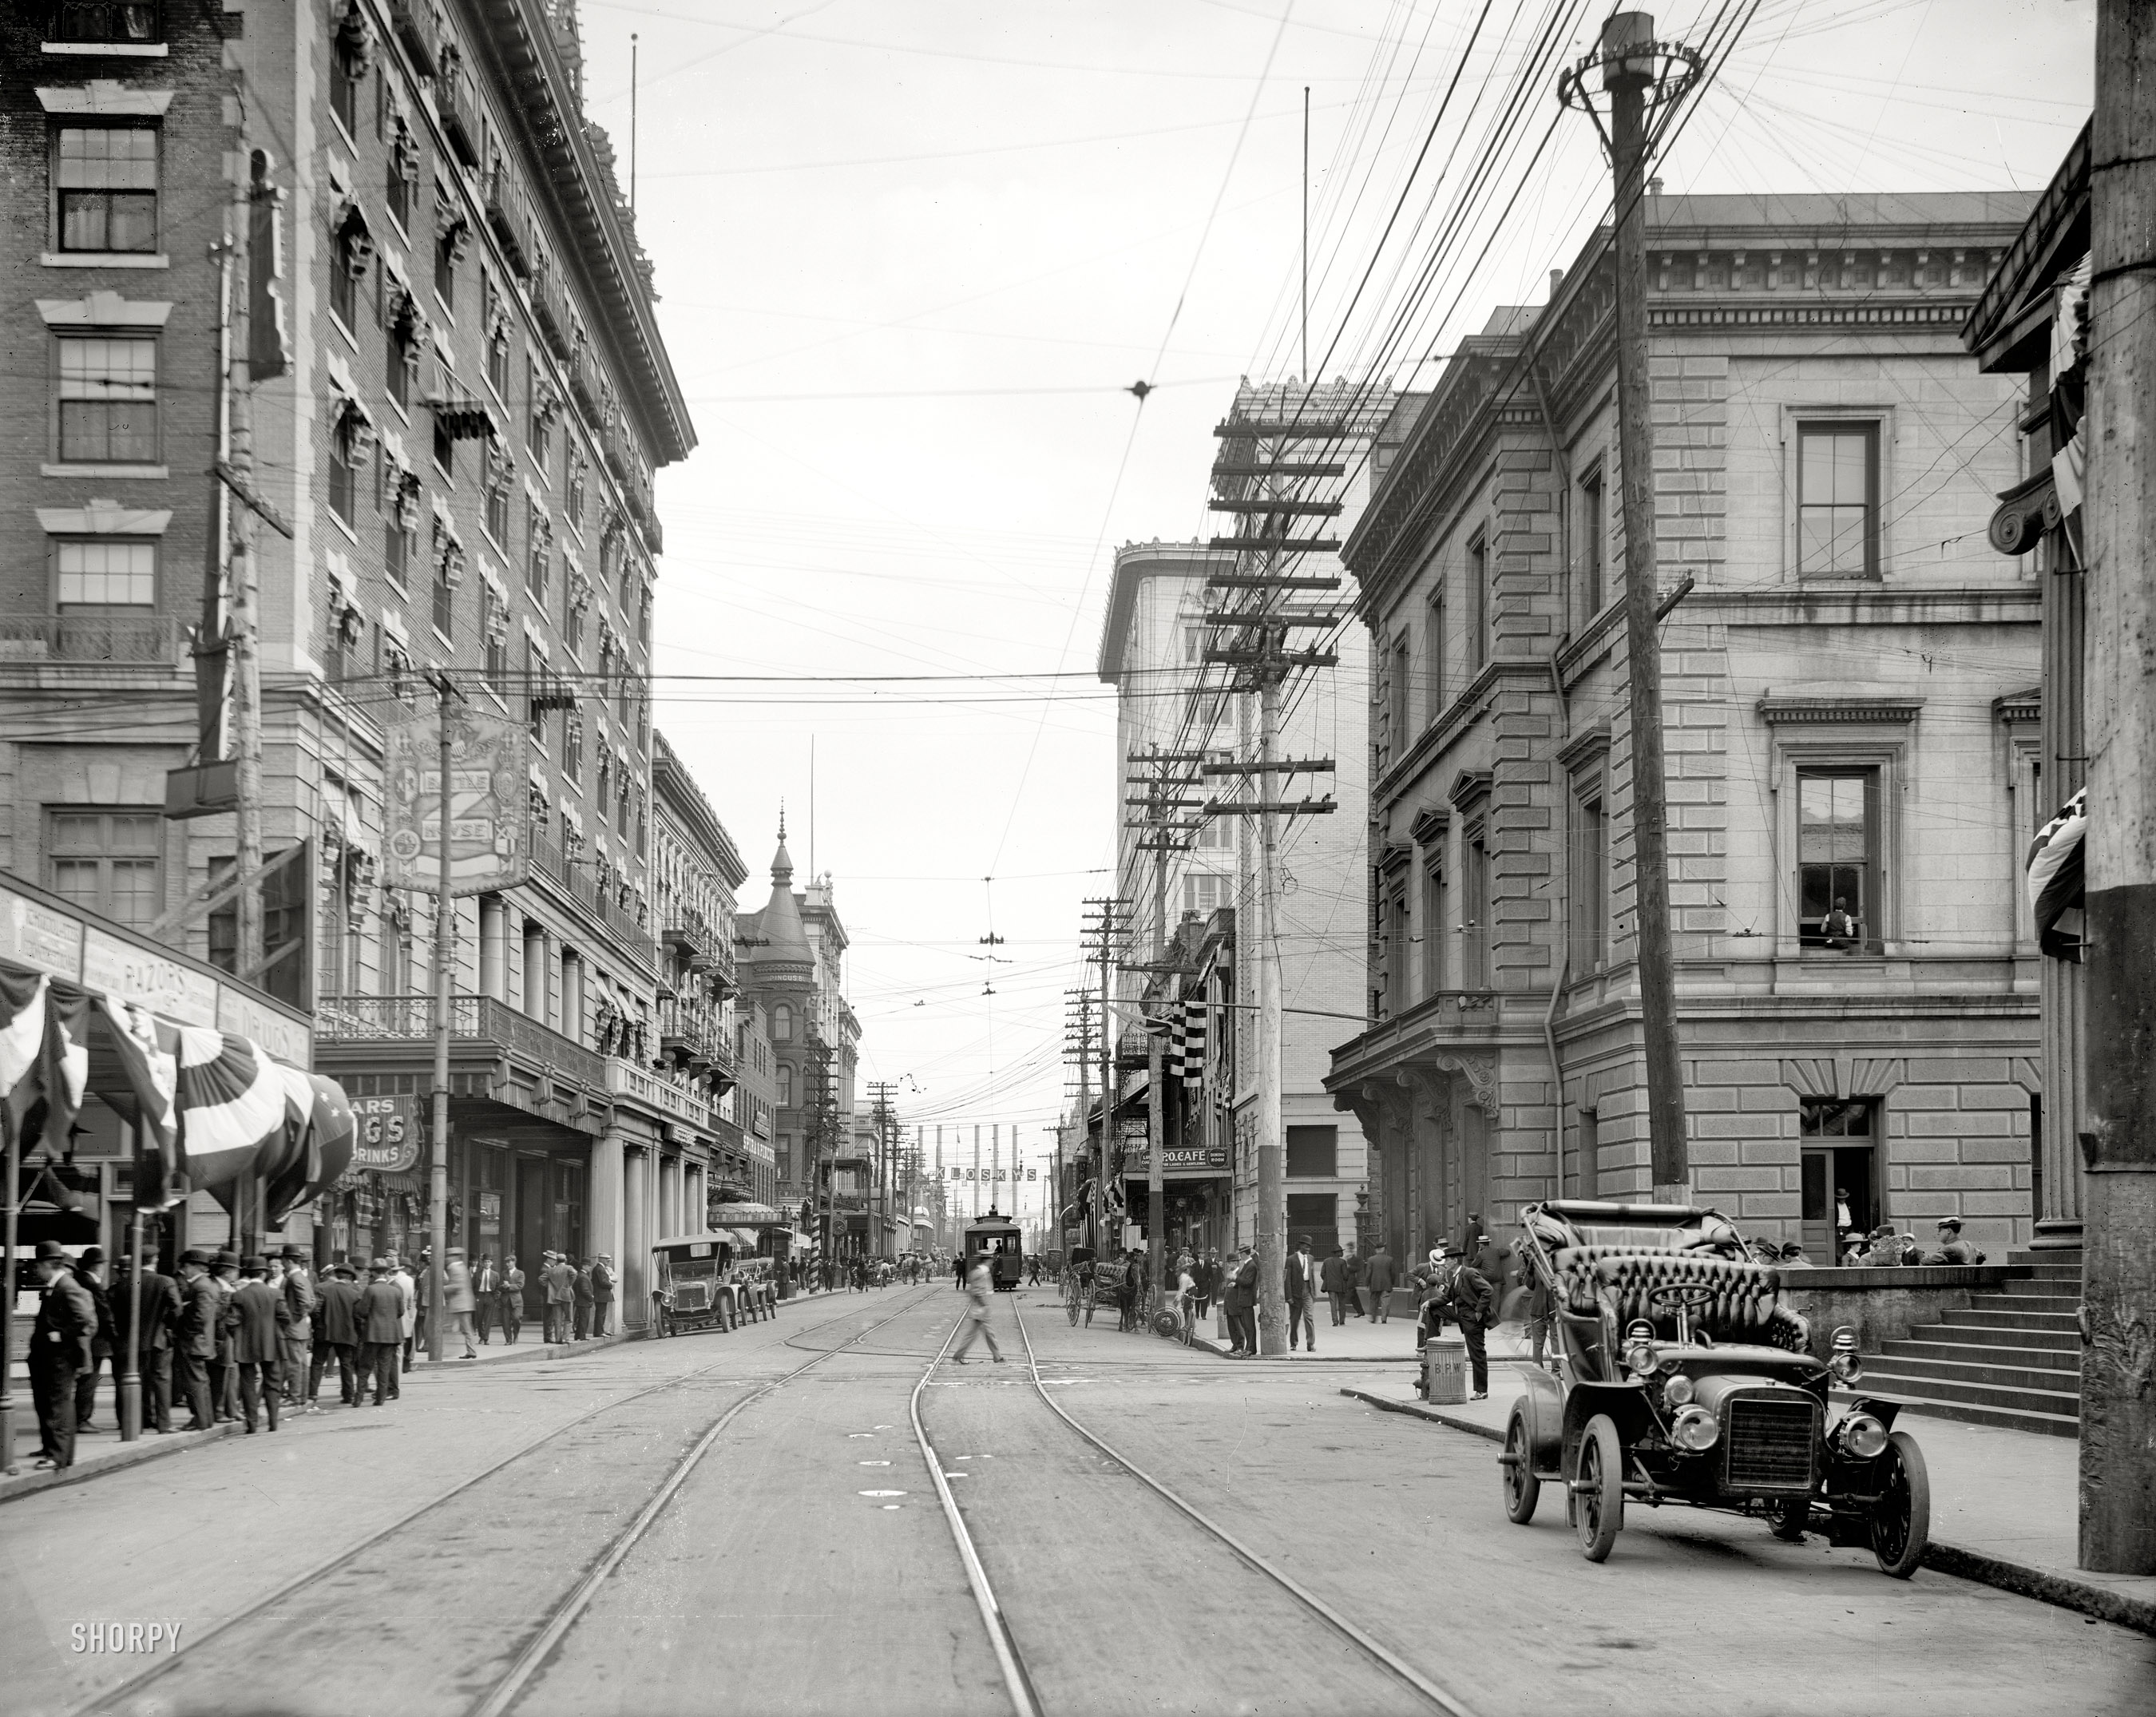 Mobile, Alabama, circa 1910. "Royal Street looking south from St. Francis." 8x10 inch dry plate glass negative, Detroit Publishing Company. View full size.